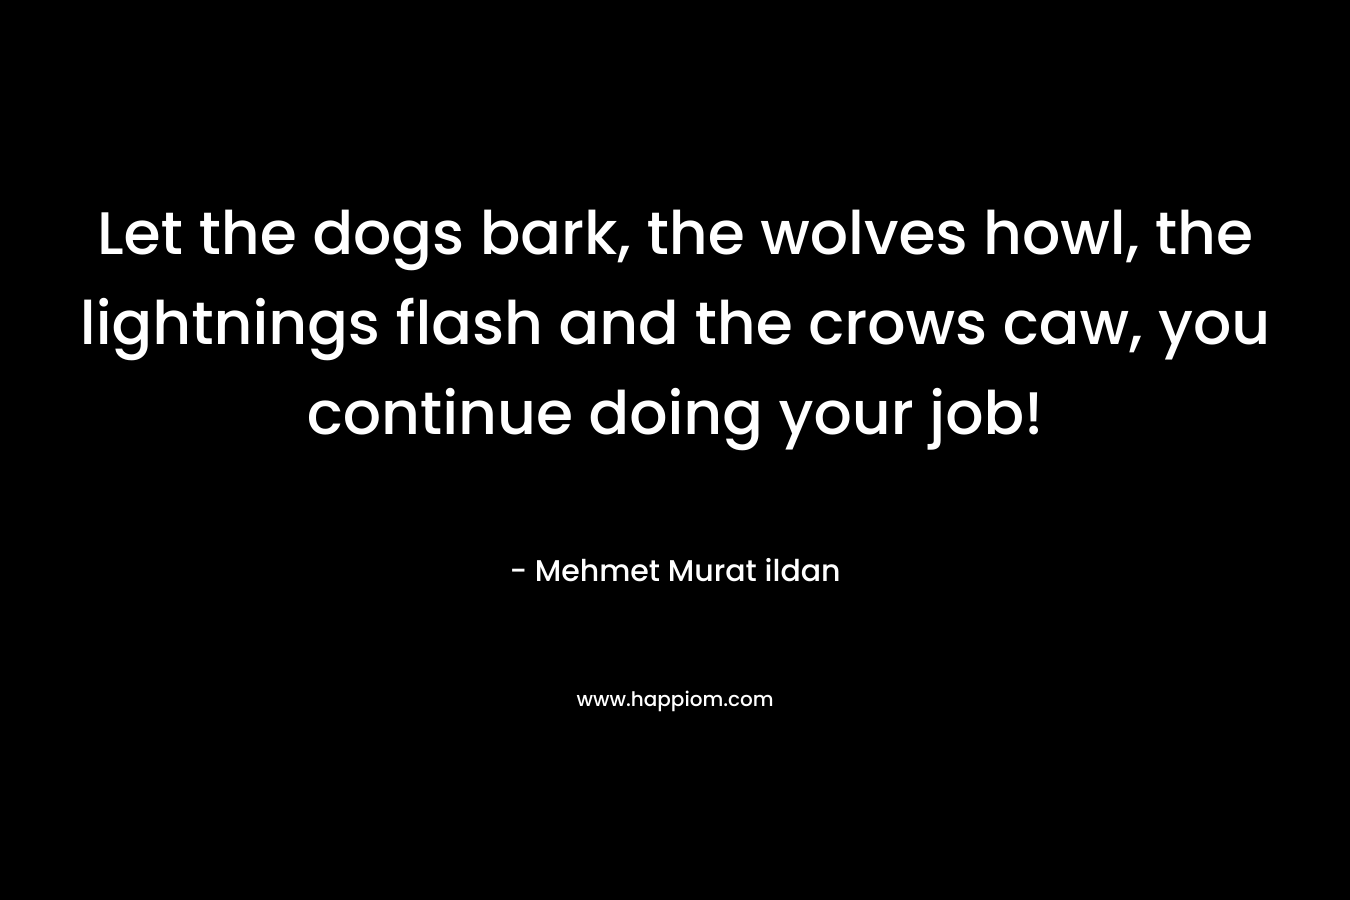 Let the dogs bark, the wolves howl, the lightnings flash and the crows caw, you continue doing your job! – Mehmet Murat ildan